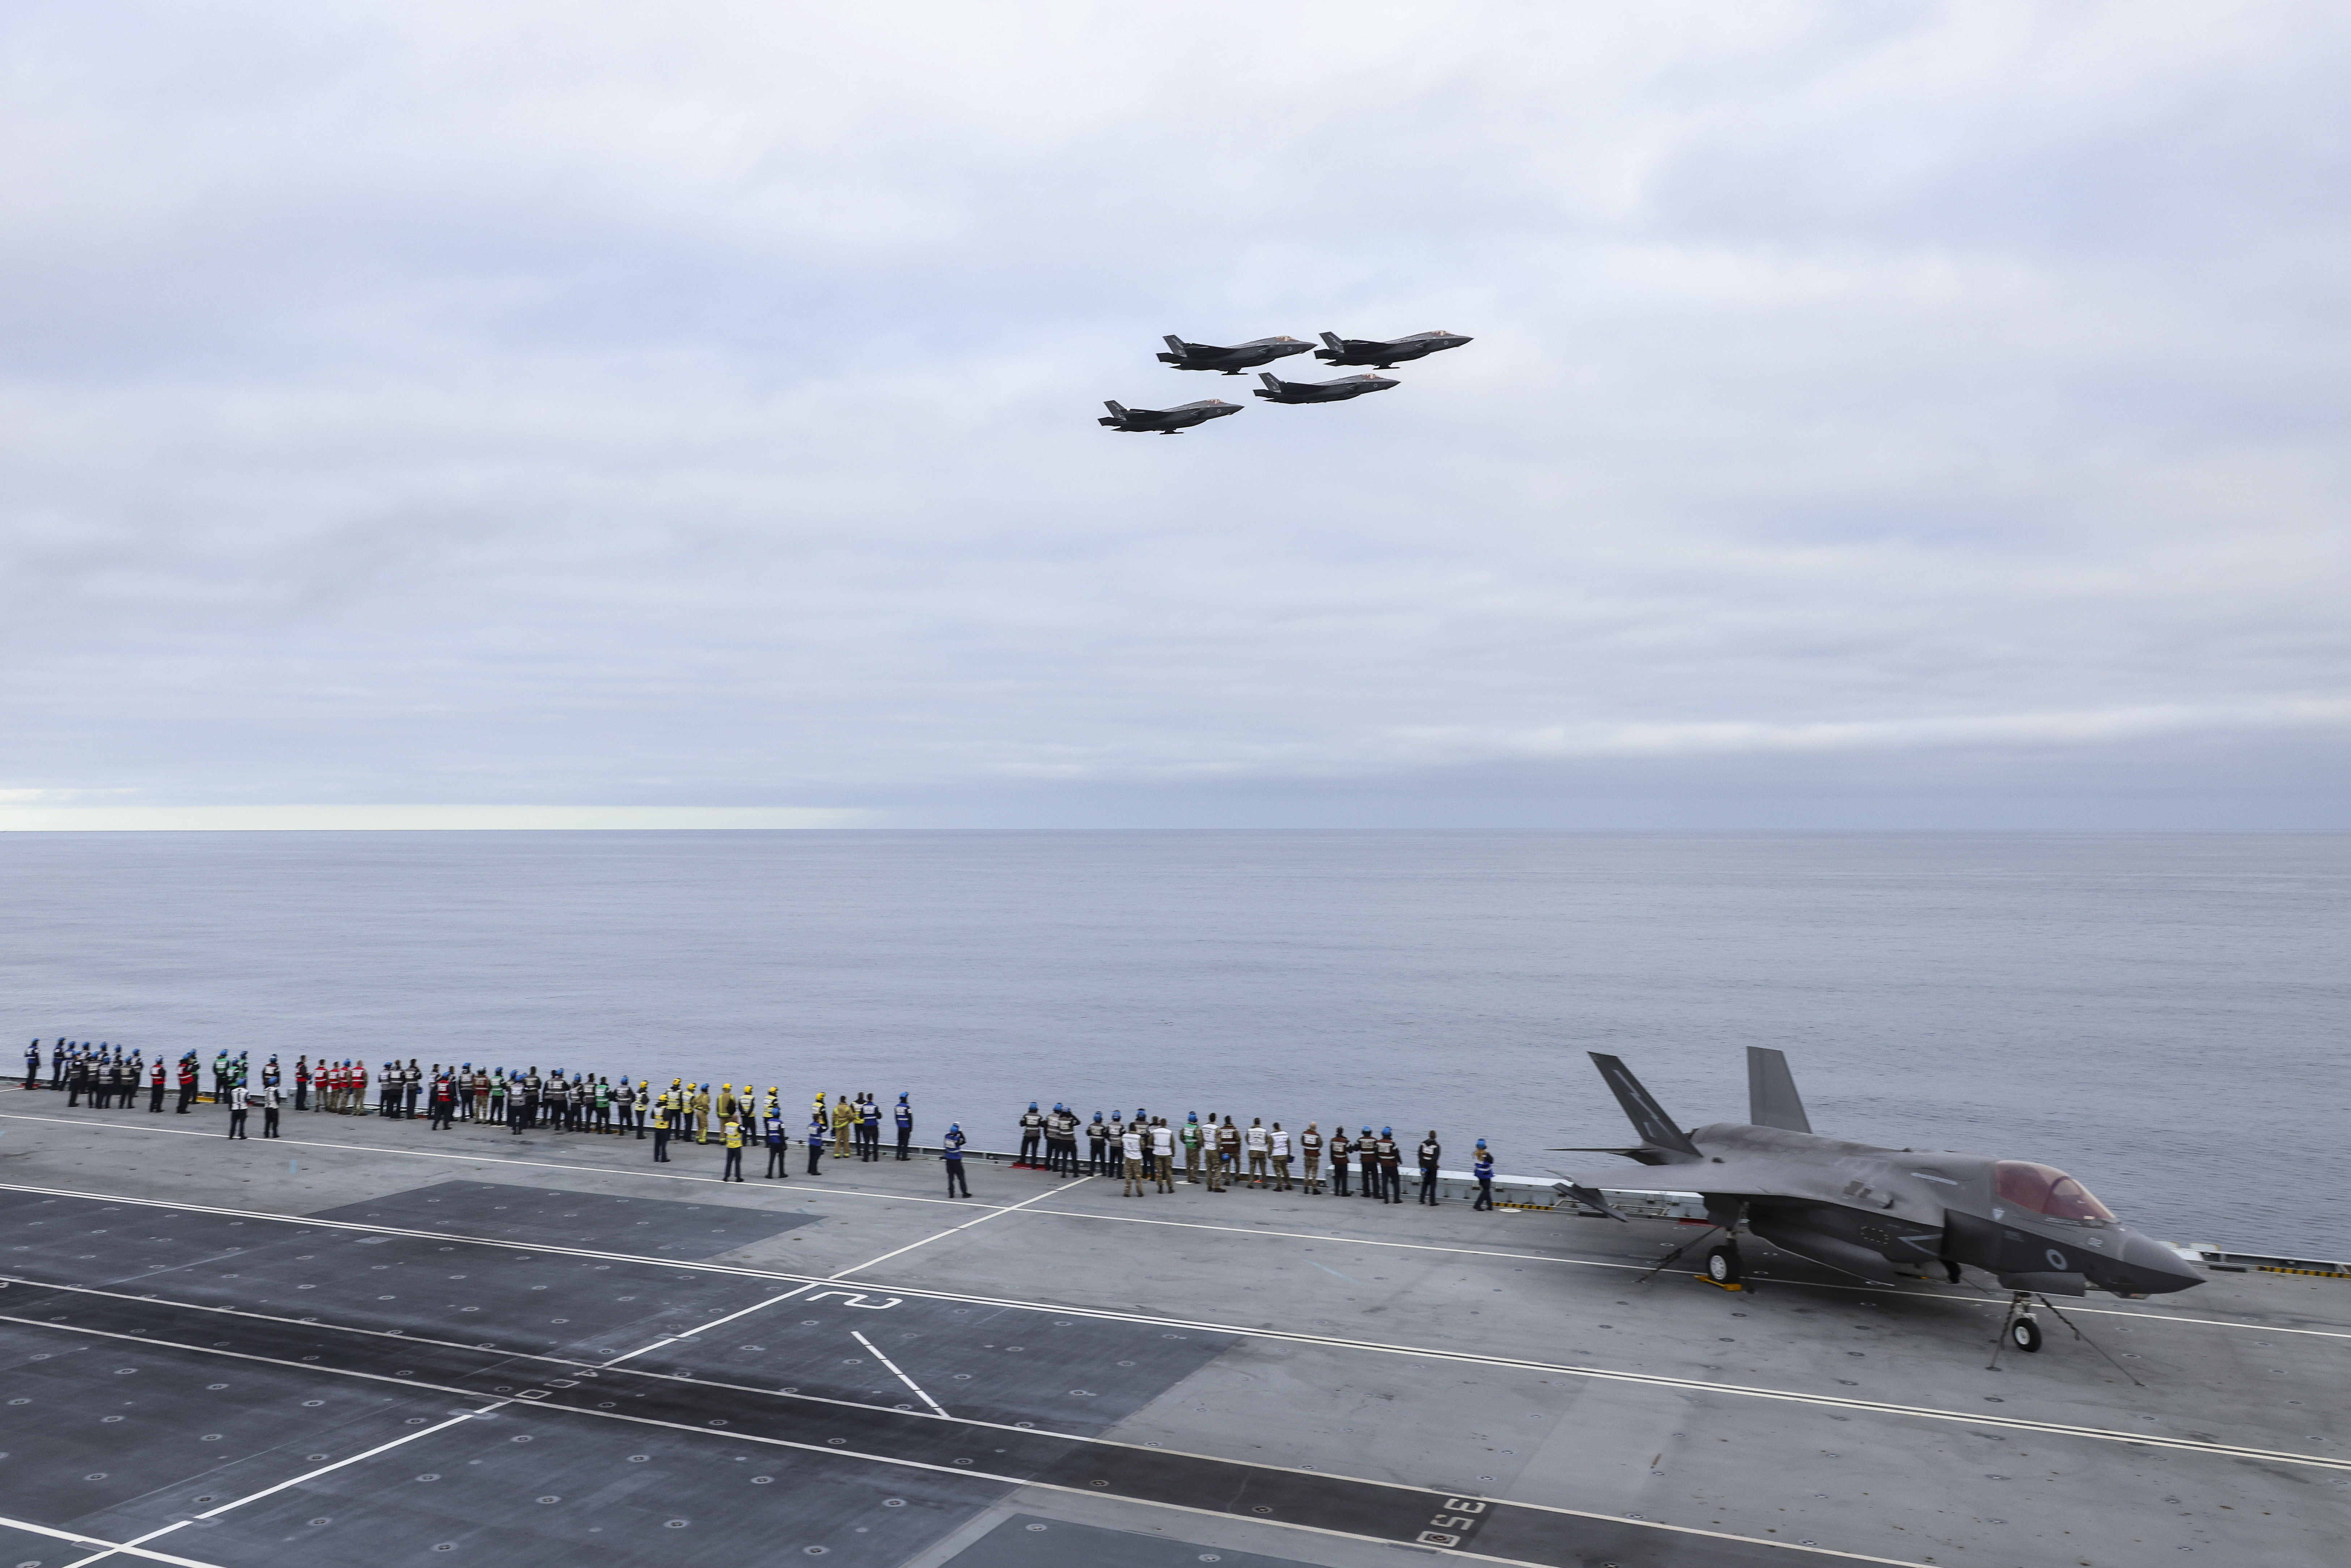 Image shows personnel and RAF Typhoons on the deck of aircraft carrier, with flypast.